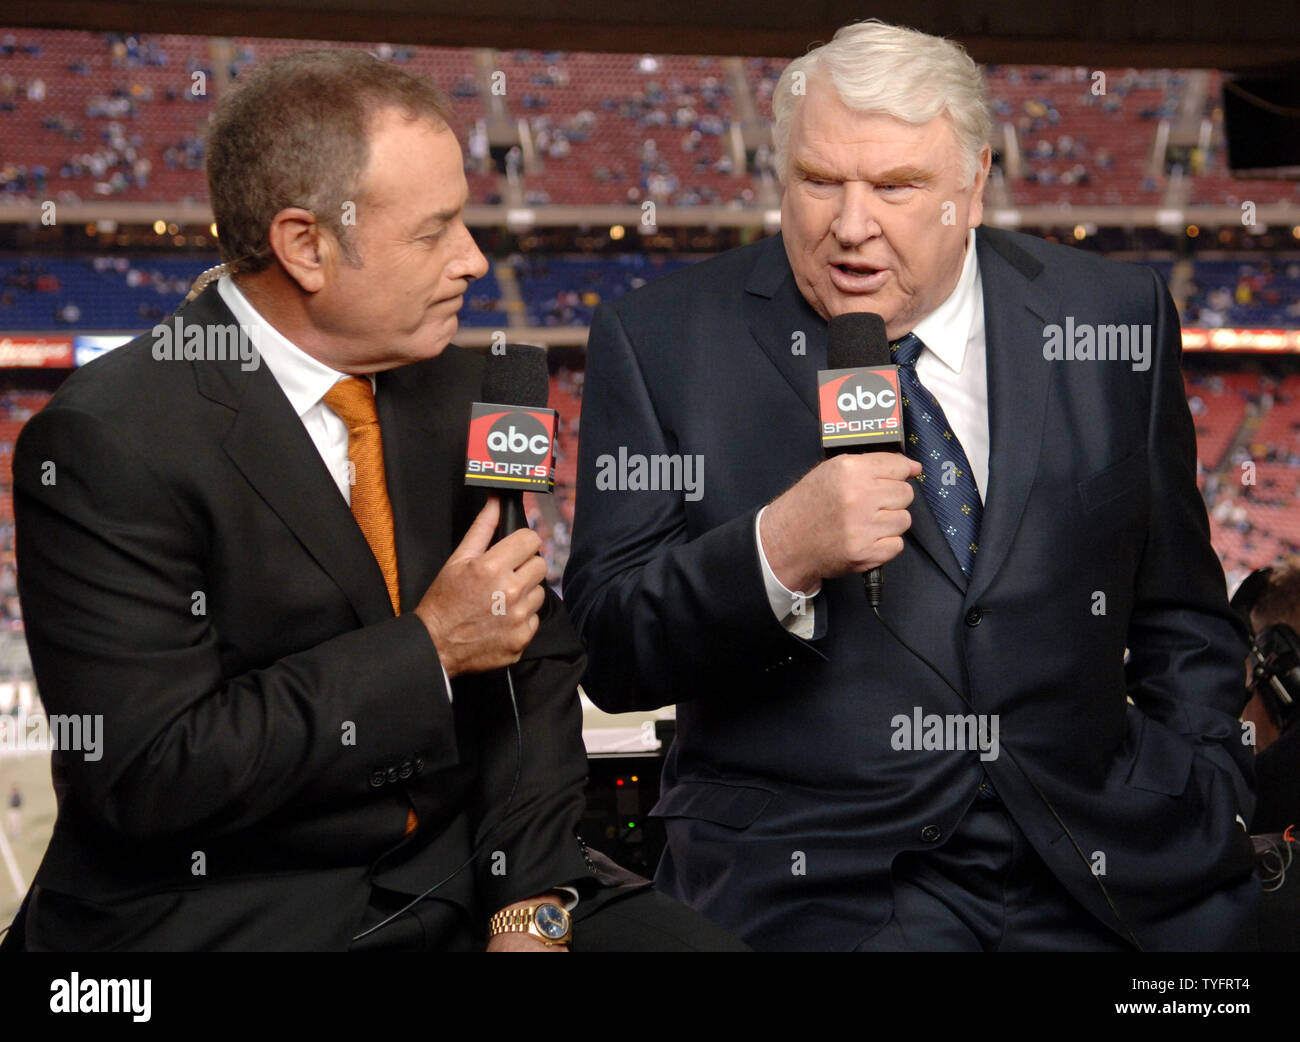 John Madden and Al Michaels do their last broadcast of ABC's Monday Night Football at Giants Stadium in East Rutherford, New Jersey on December 26, 2005. The New England Patriots defeated the New York Jets 21-7.   (UPI Photo/Ida Mae Astute/ Pool) Stock Photo